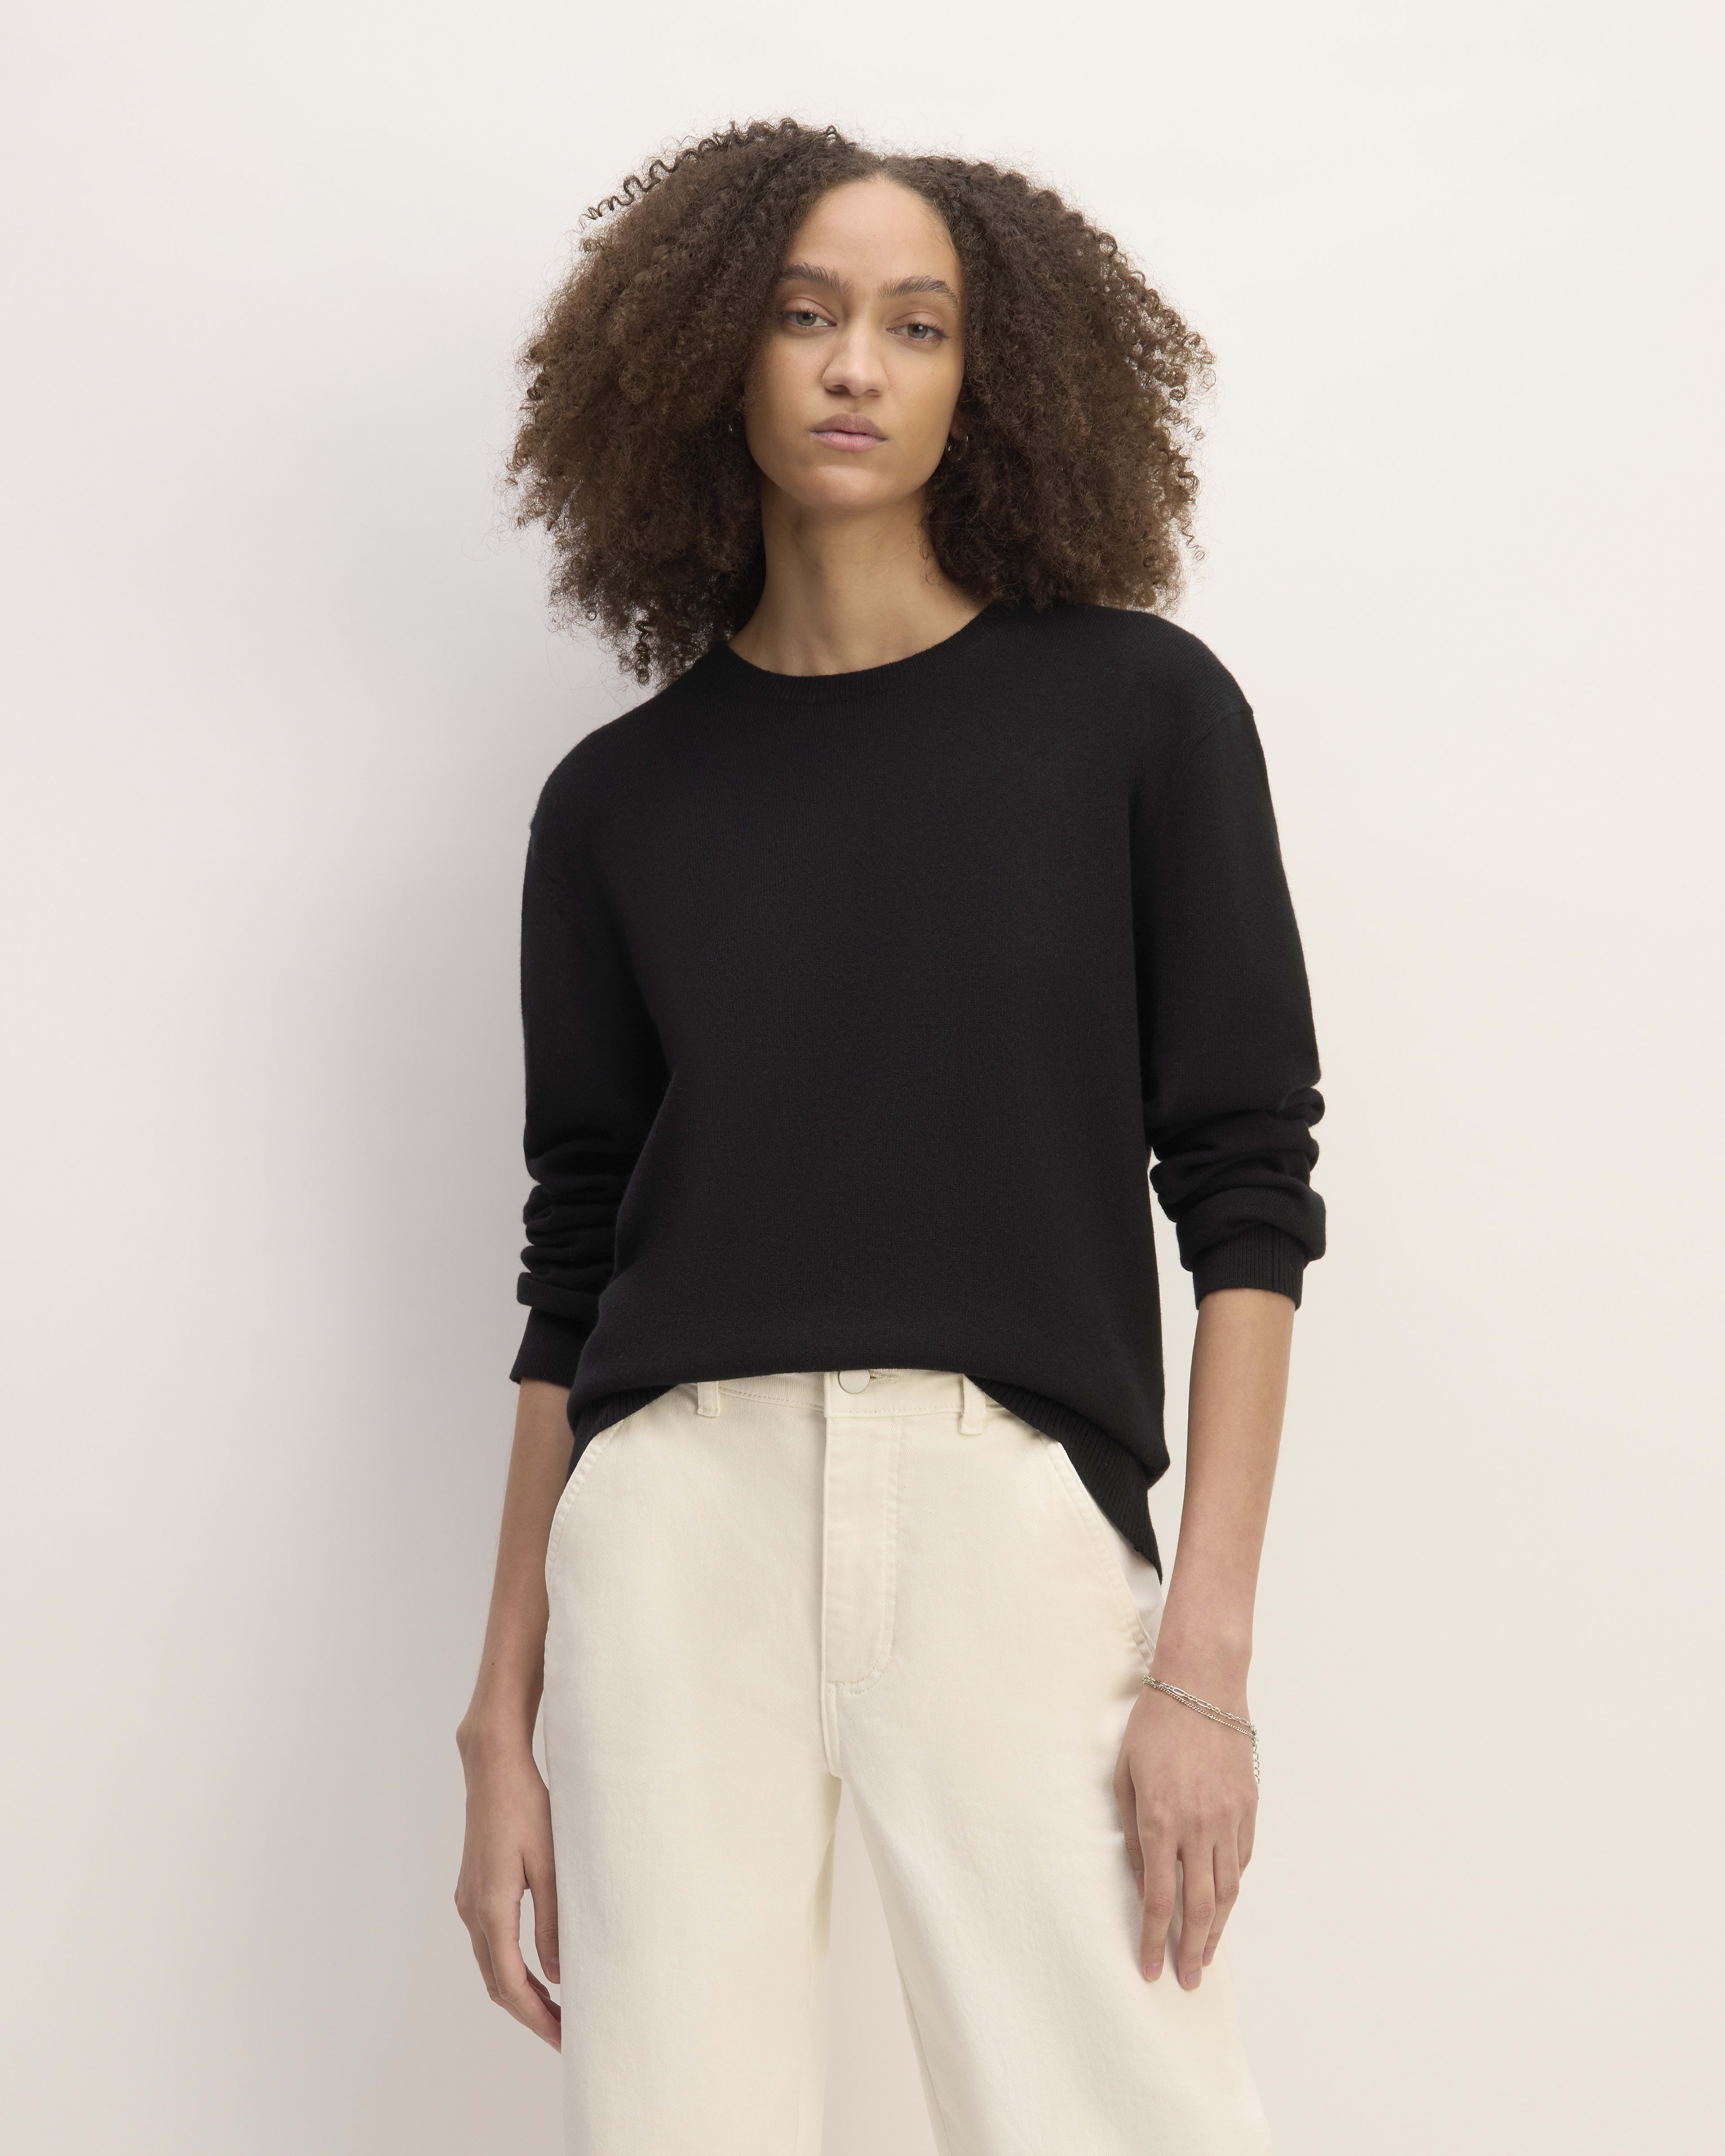 Everlane Cashmere Is On Major Sale for 1 Day Only - PureWow